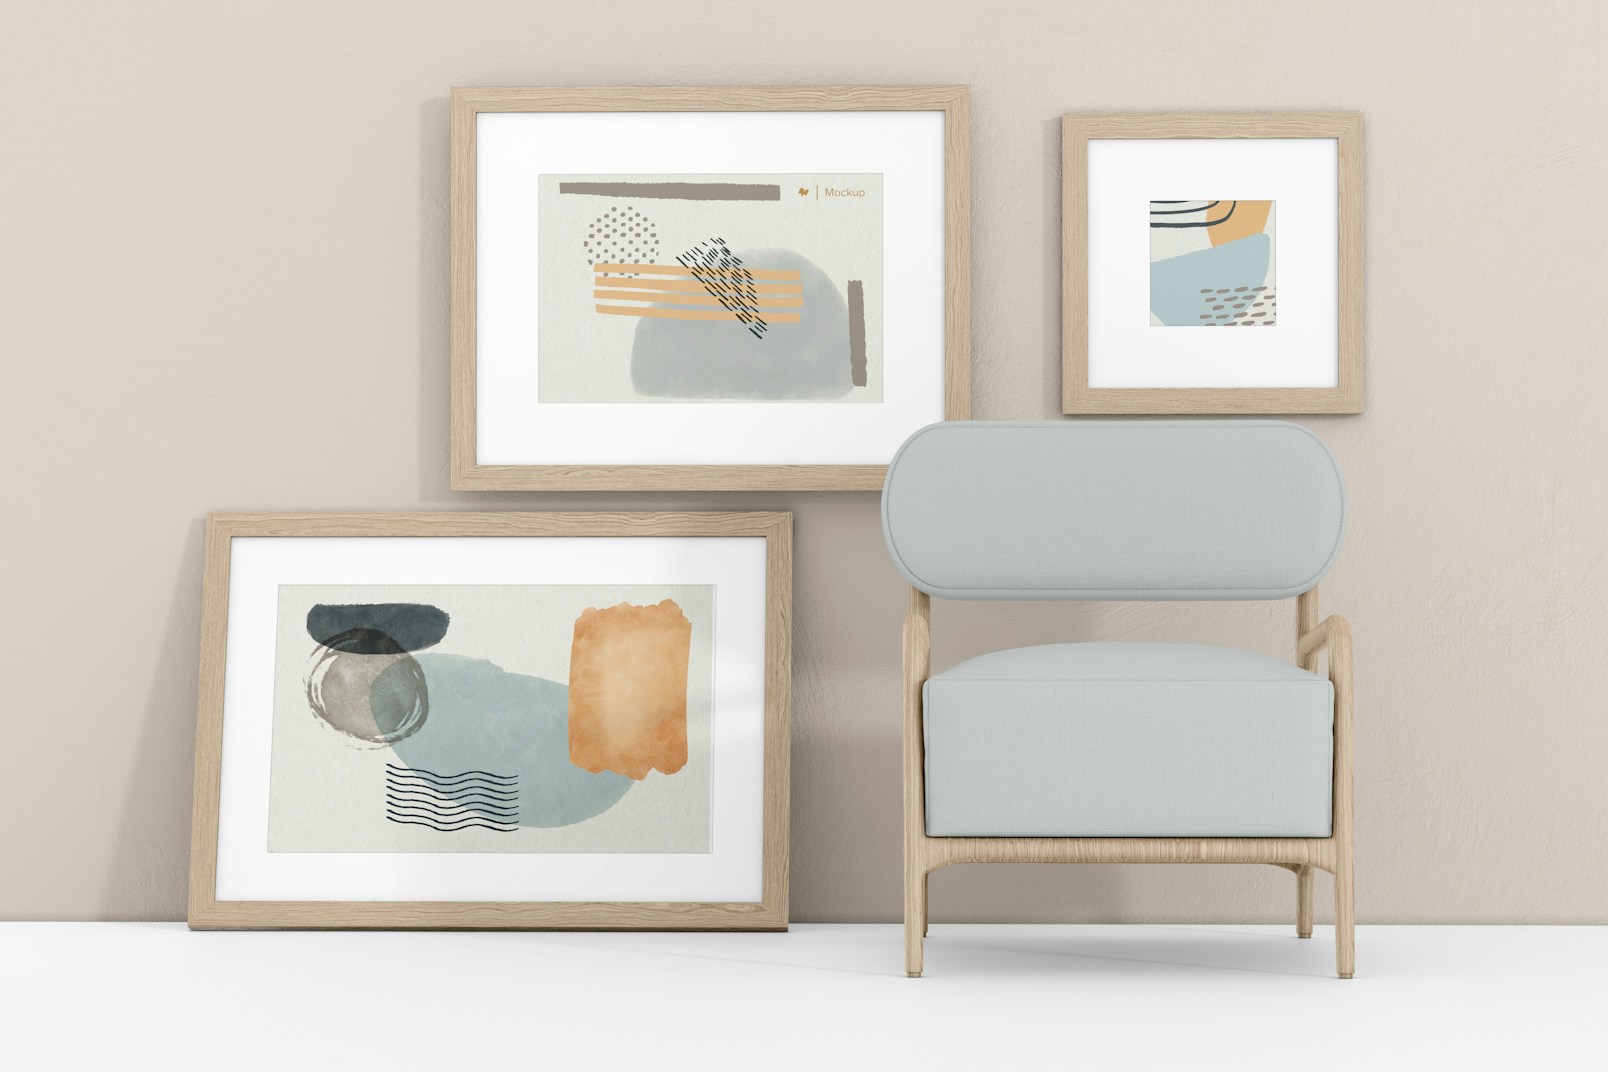 Gallery Frames with Armchair Mockup, Front View